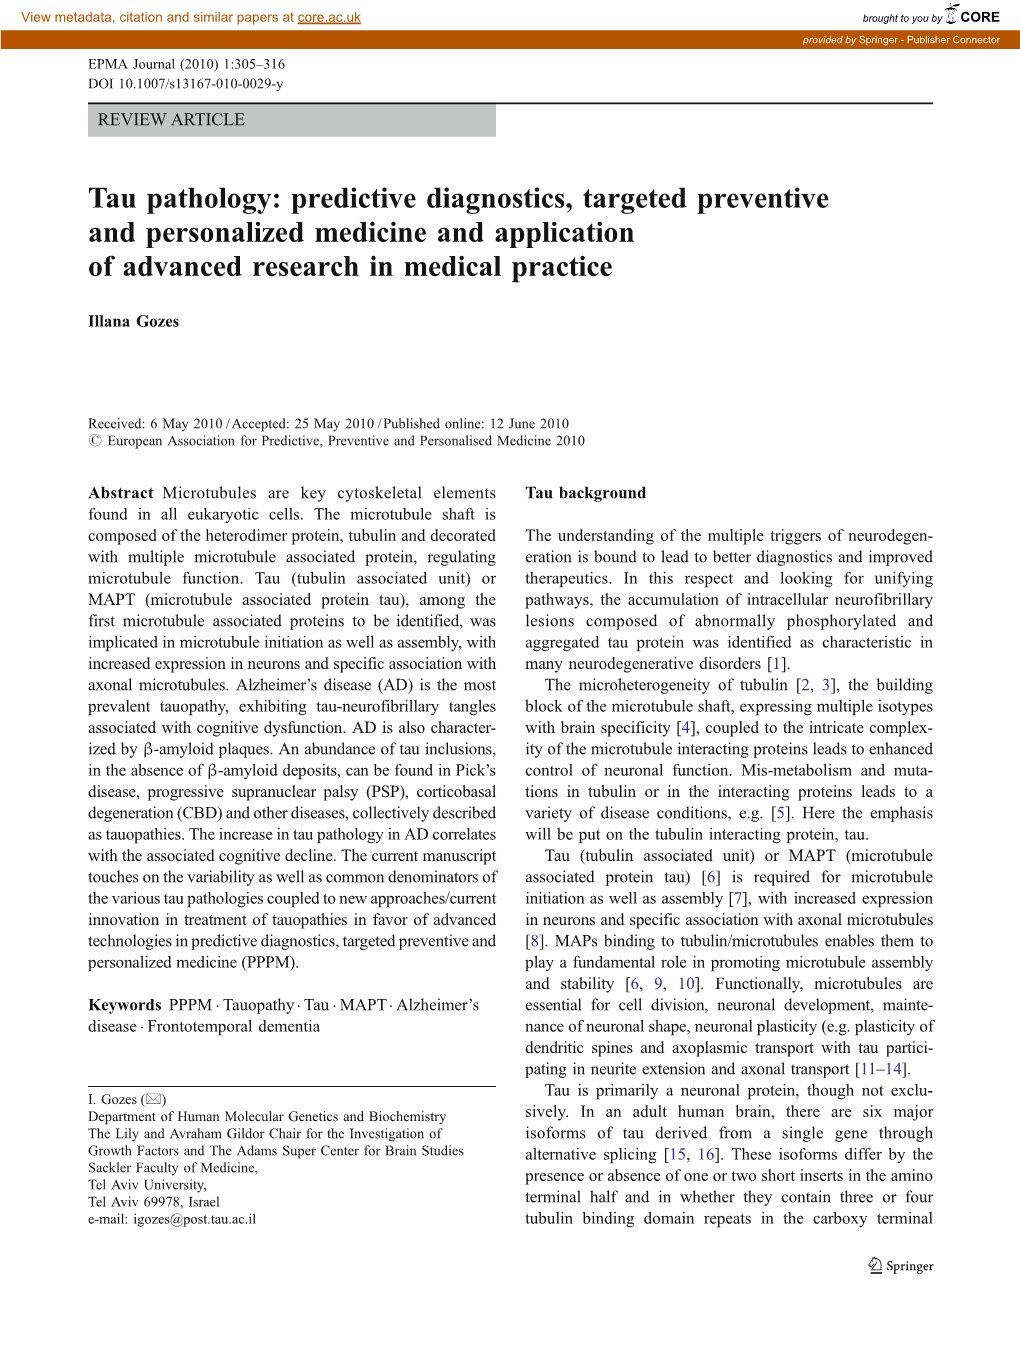 Tau Pathology: Predictive Diagnostics, Targeted Preventive and Personalized Medicine and Application of Advanced Research in Medical Practice